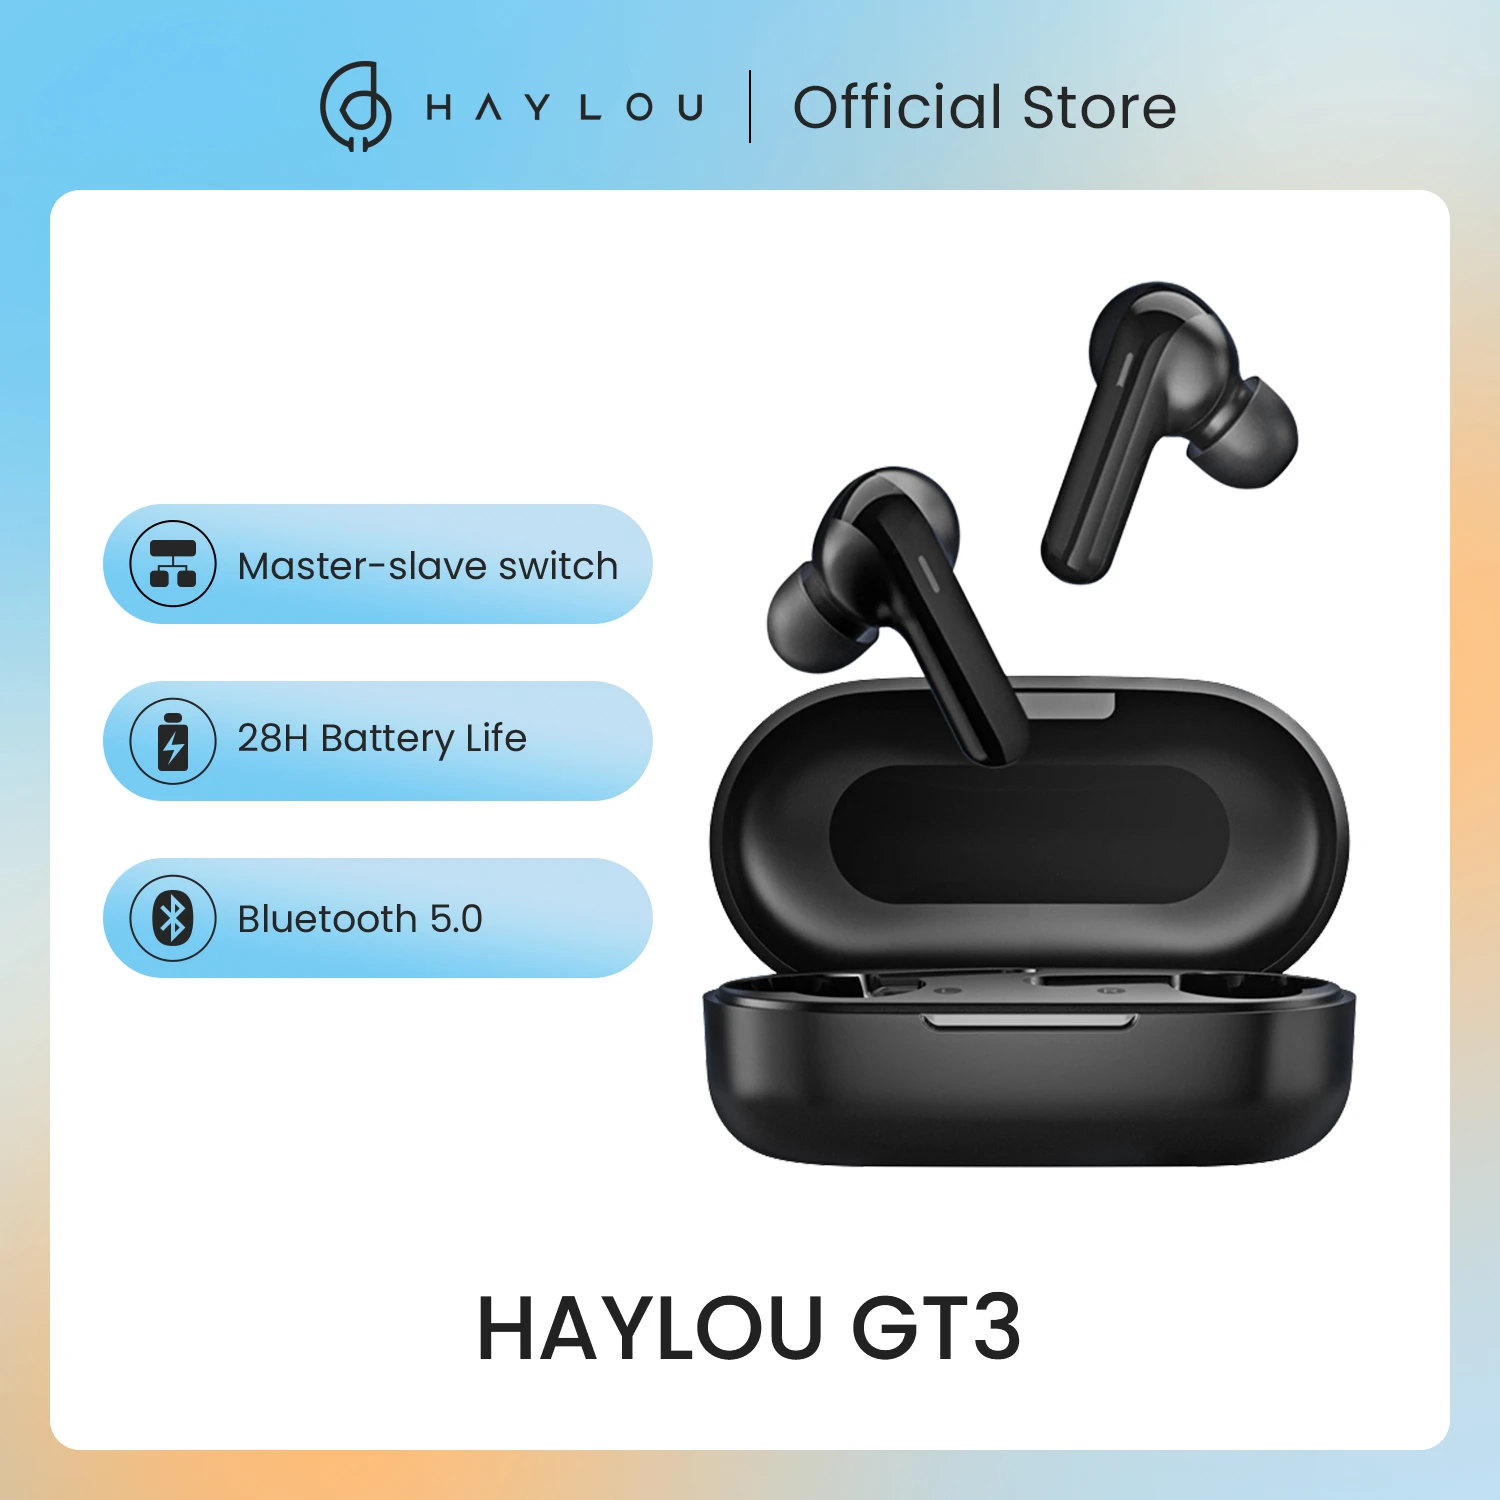 DSP Noise Reduction Haylou GT3 Bluetooth 5.0 Earphones,28hours Music Time Smart Touch Control Wireless Game Headphones